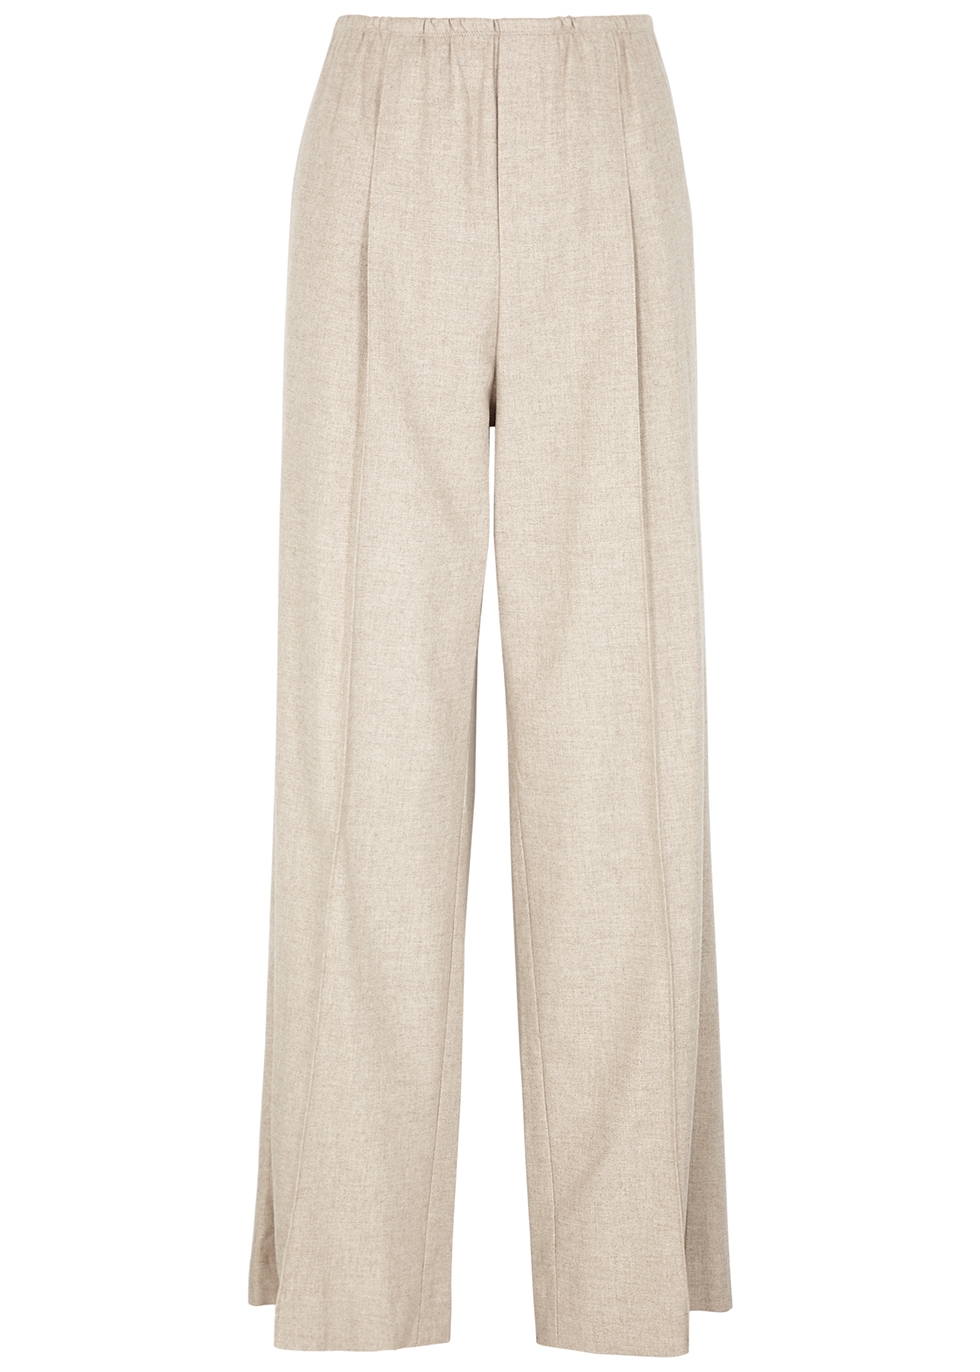 grey casual trousers womens